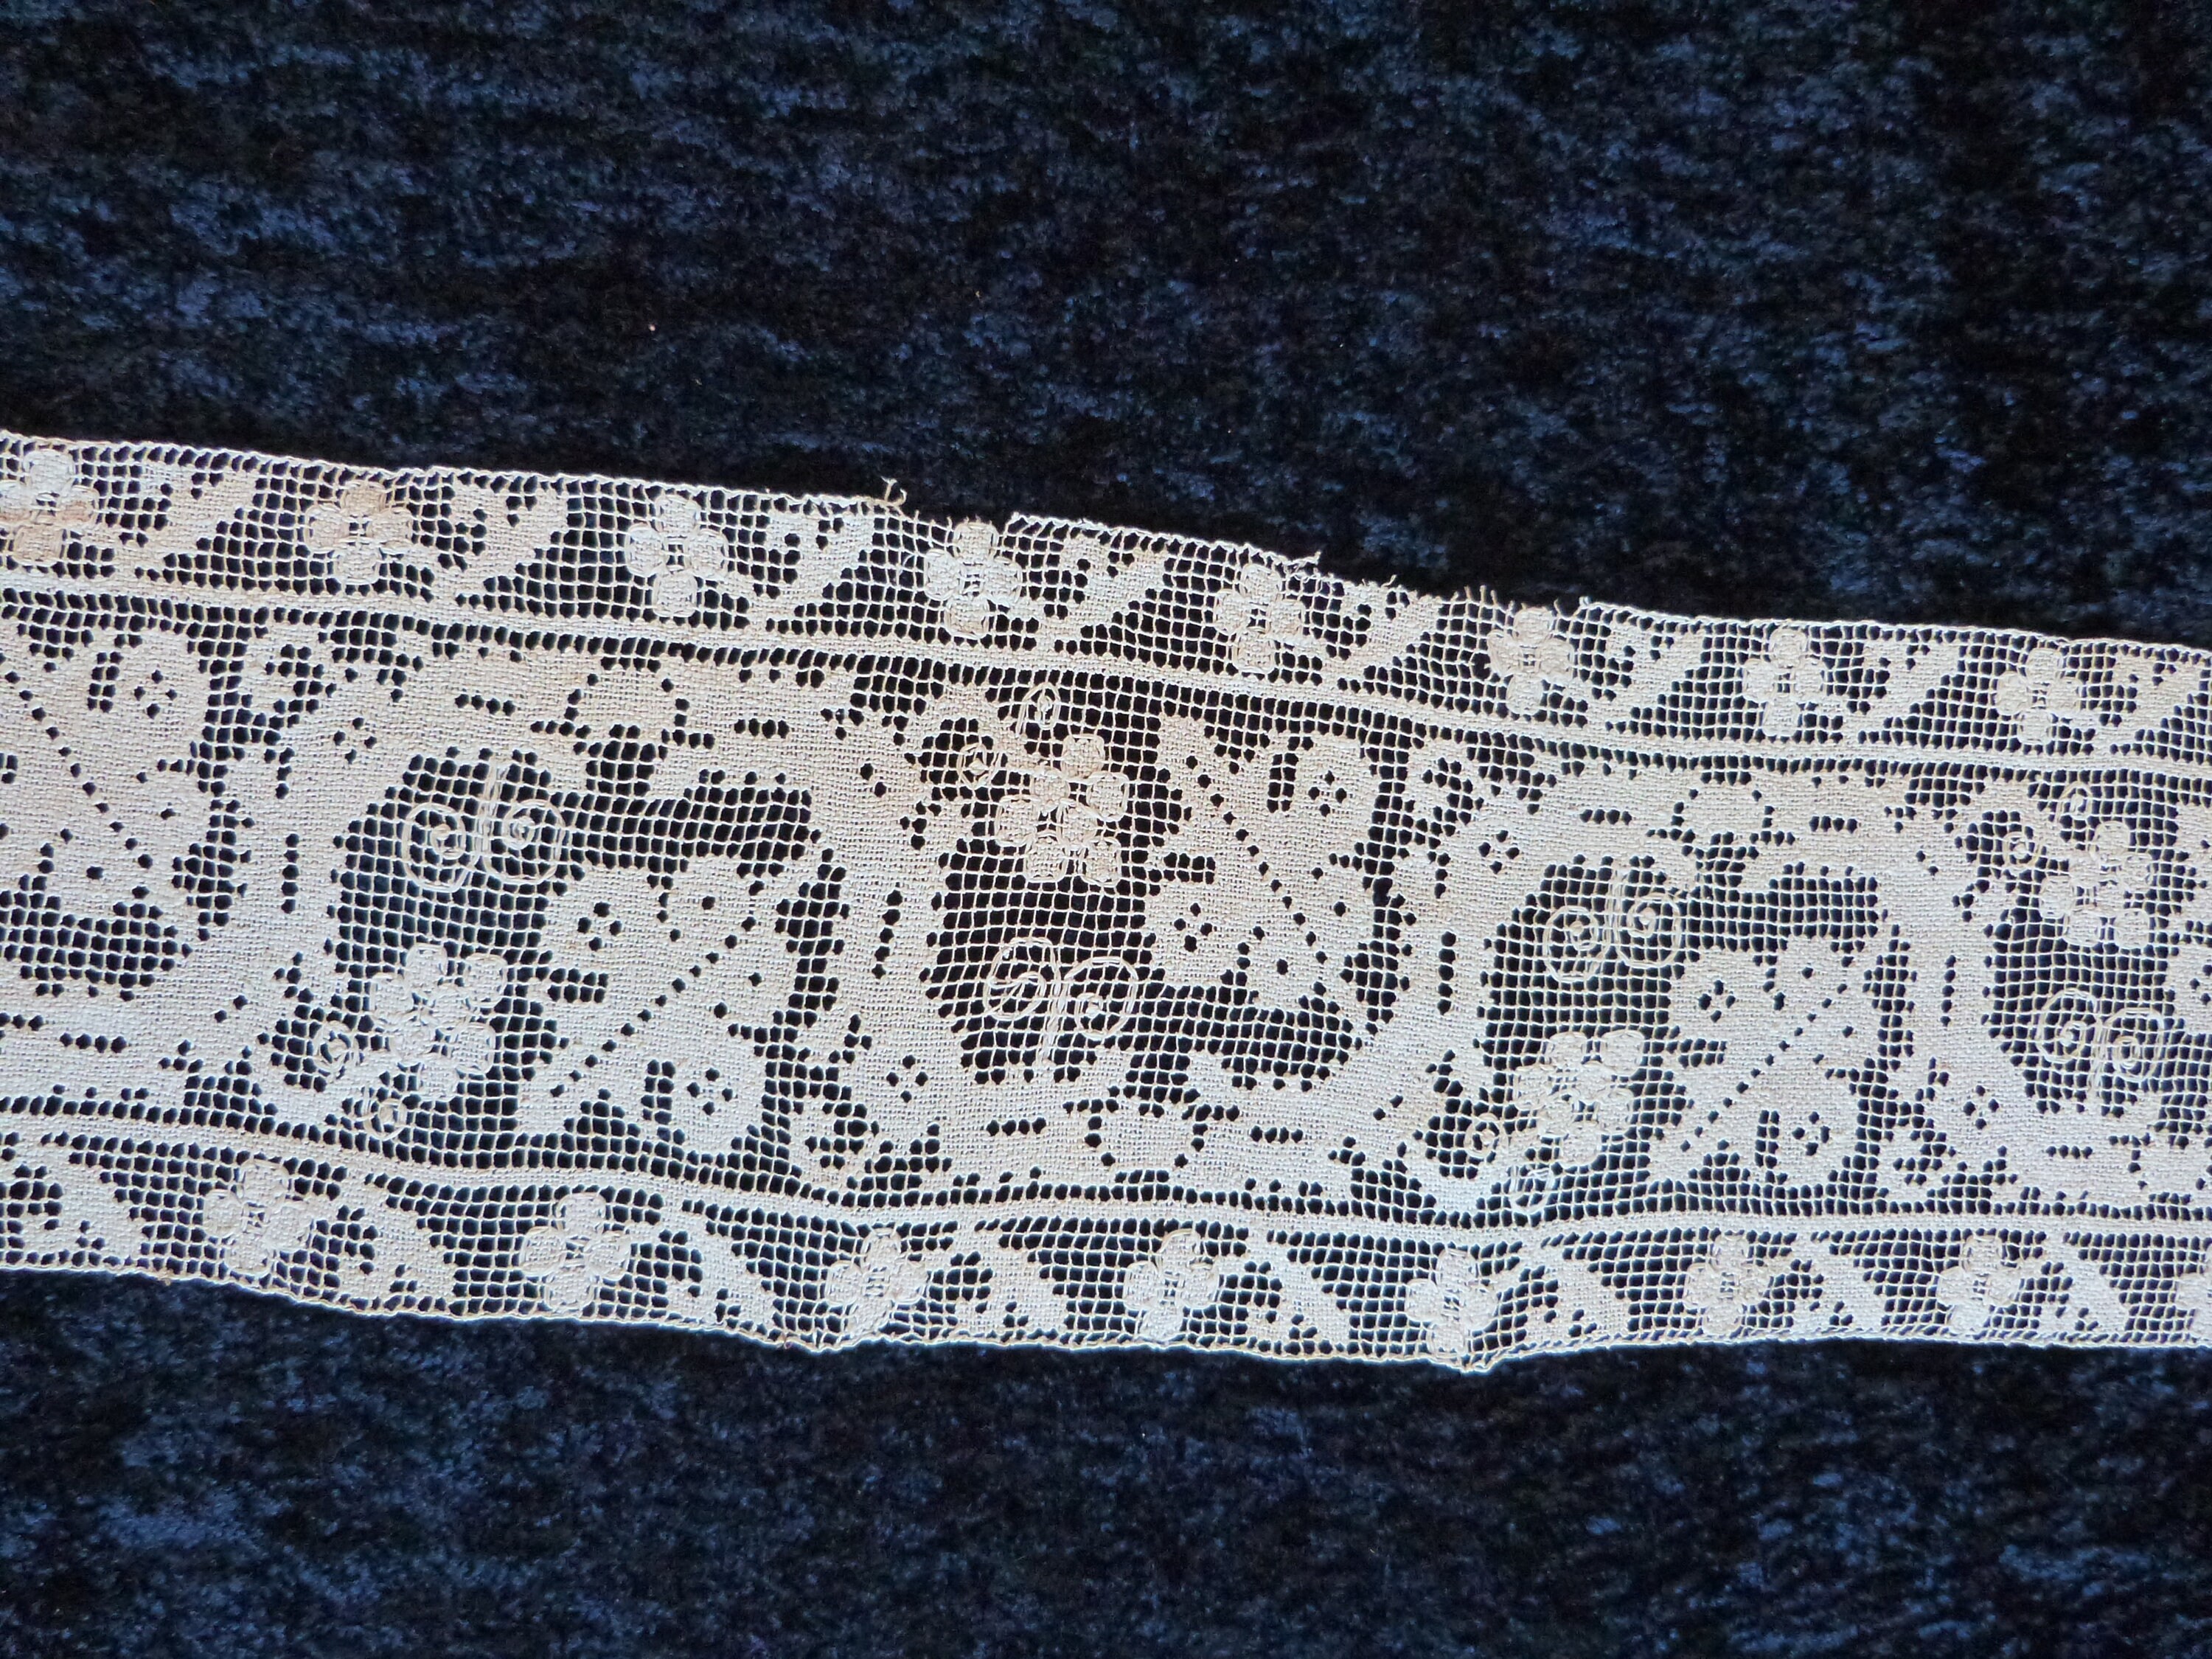 5/8 Ecru French Lace Edging - Sew Vintagely